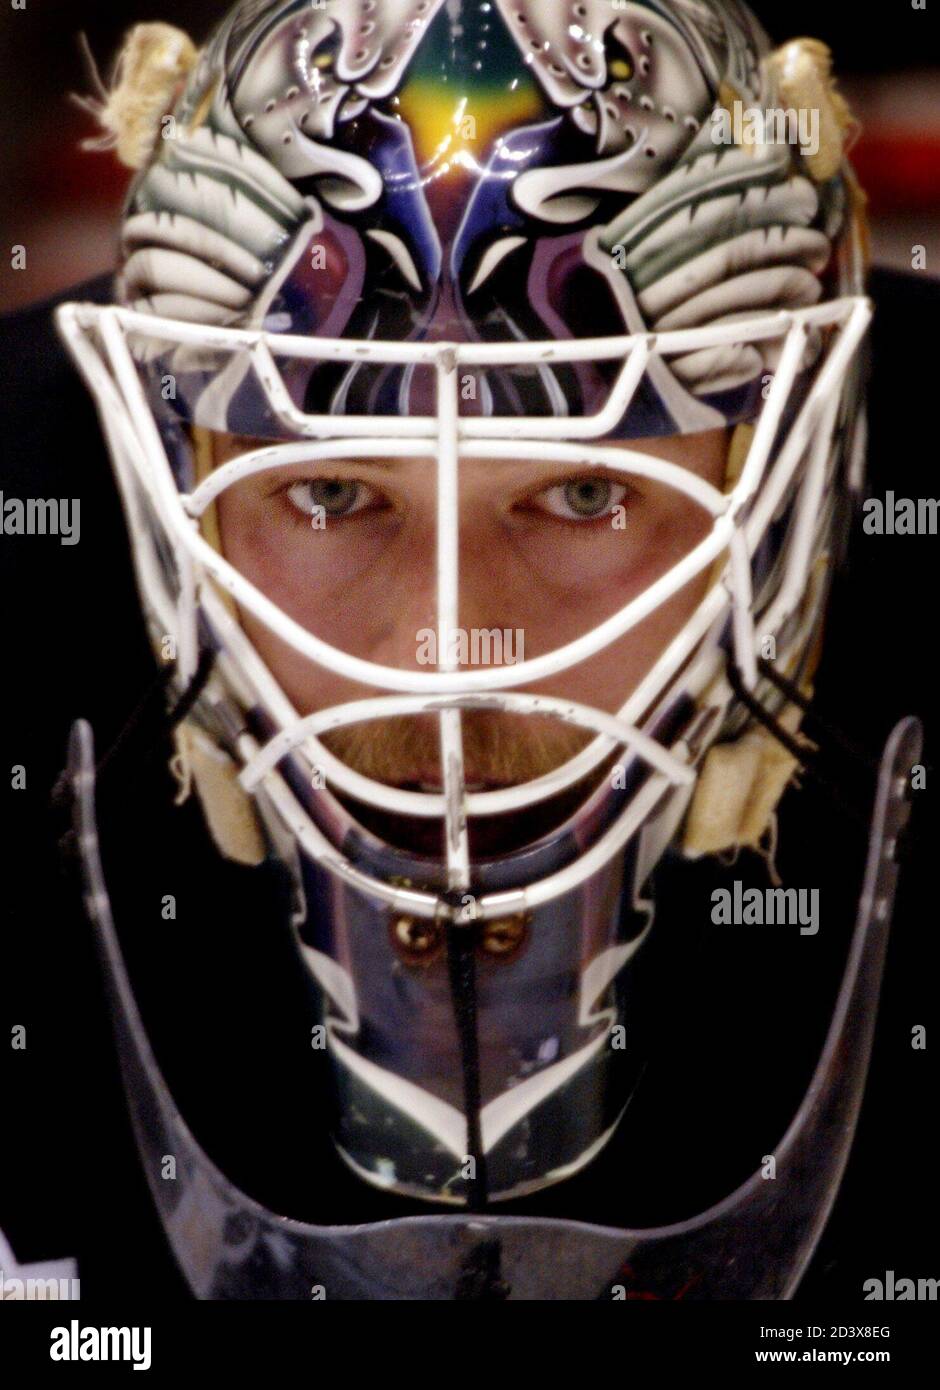 Anaheim Mighty Ducks goalie Jean-Sebastien Giguere looks out from behind his mask during practice at The Pond in Anaheim, California May 21, 2003. The Ducks, who will face the Eastern Conference winner between the New Jersey Devils and the Ottawa Senators, will be playing in their first Stanley Cup in the club's ten-year franchise history. Pictures of the month May 2003 REUTERS/Mike Blake  MB Stock Photo